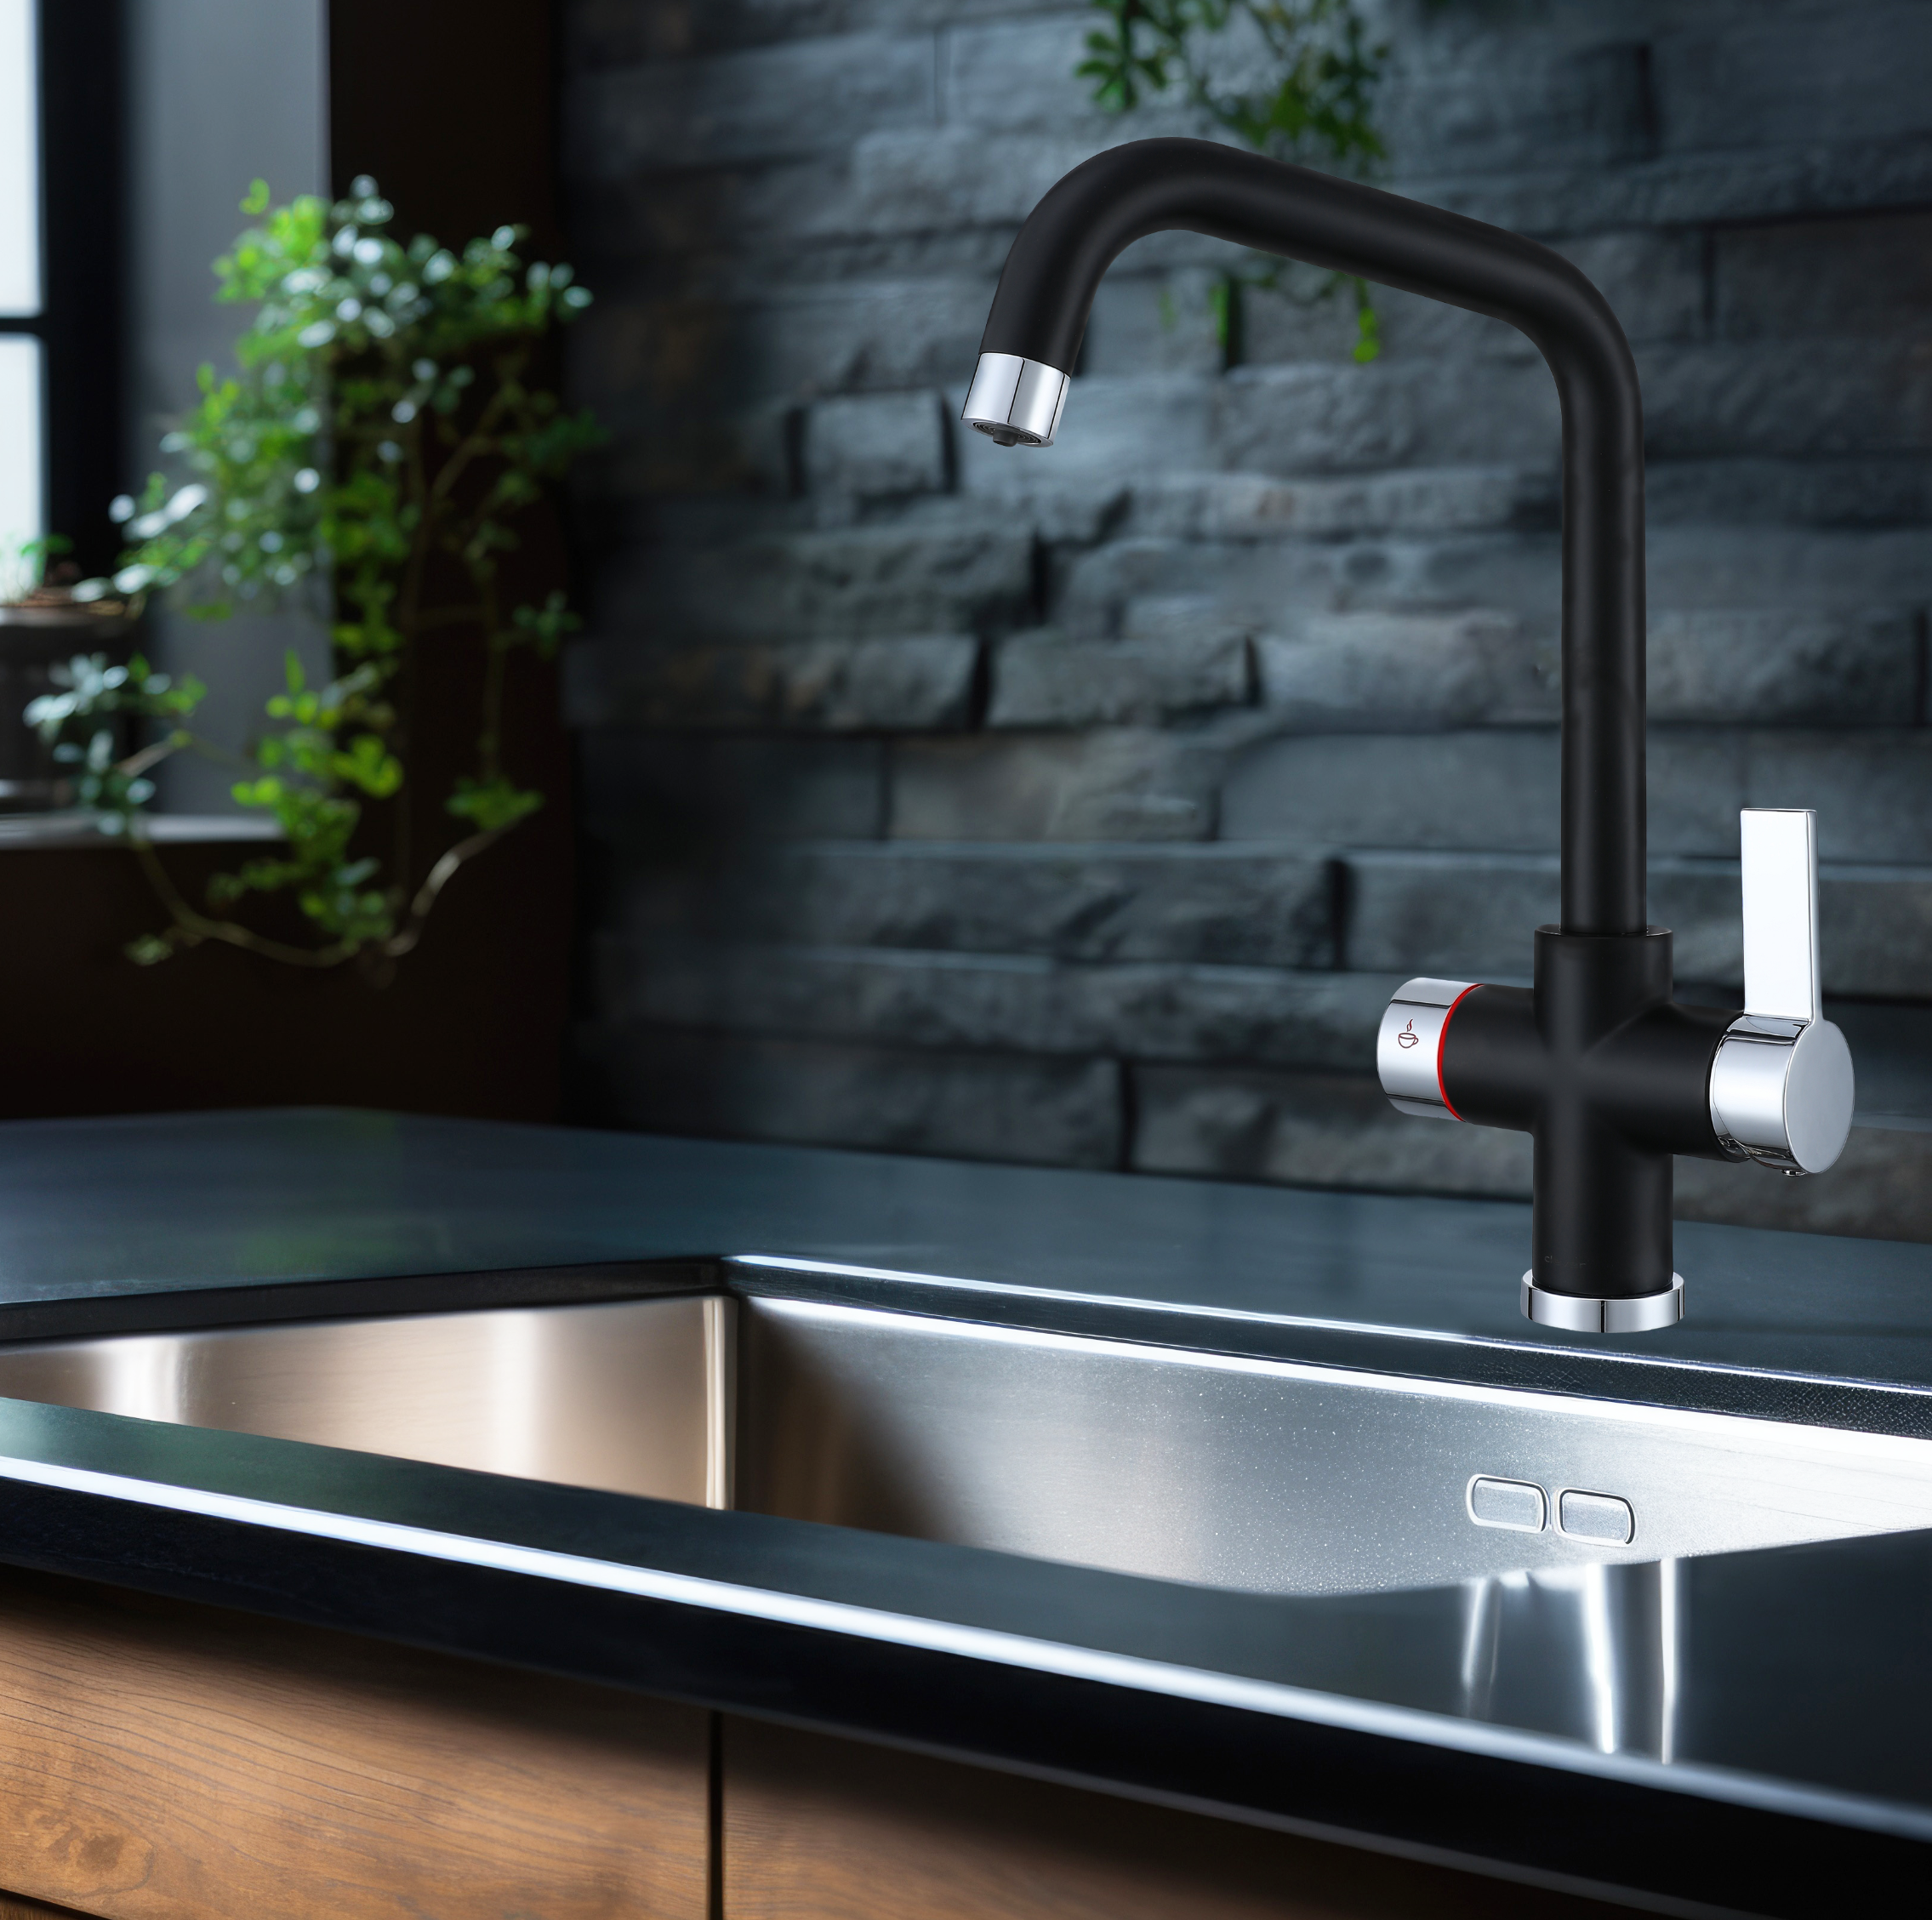 STH Westco Adds 4-in-1 Instant Hot Water Taps to Its Portfolio